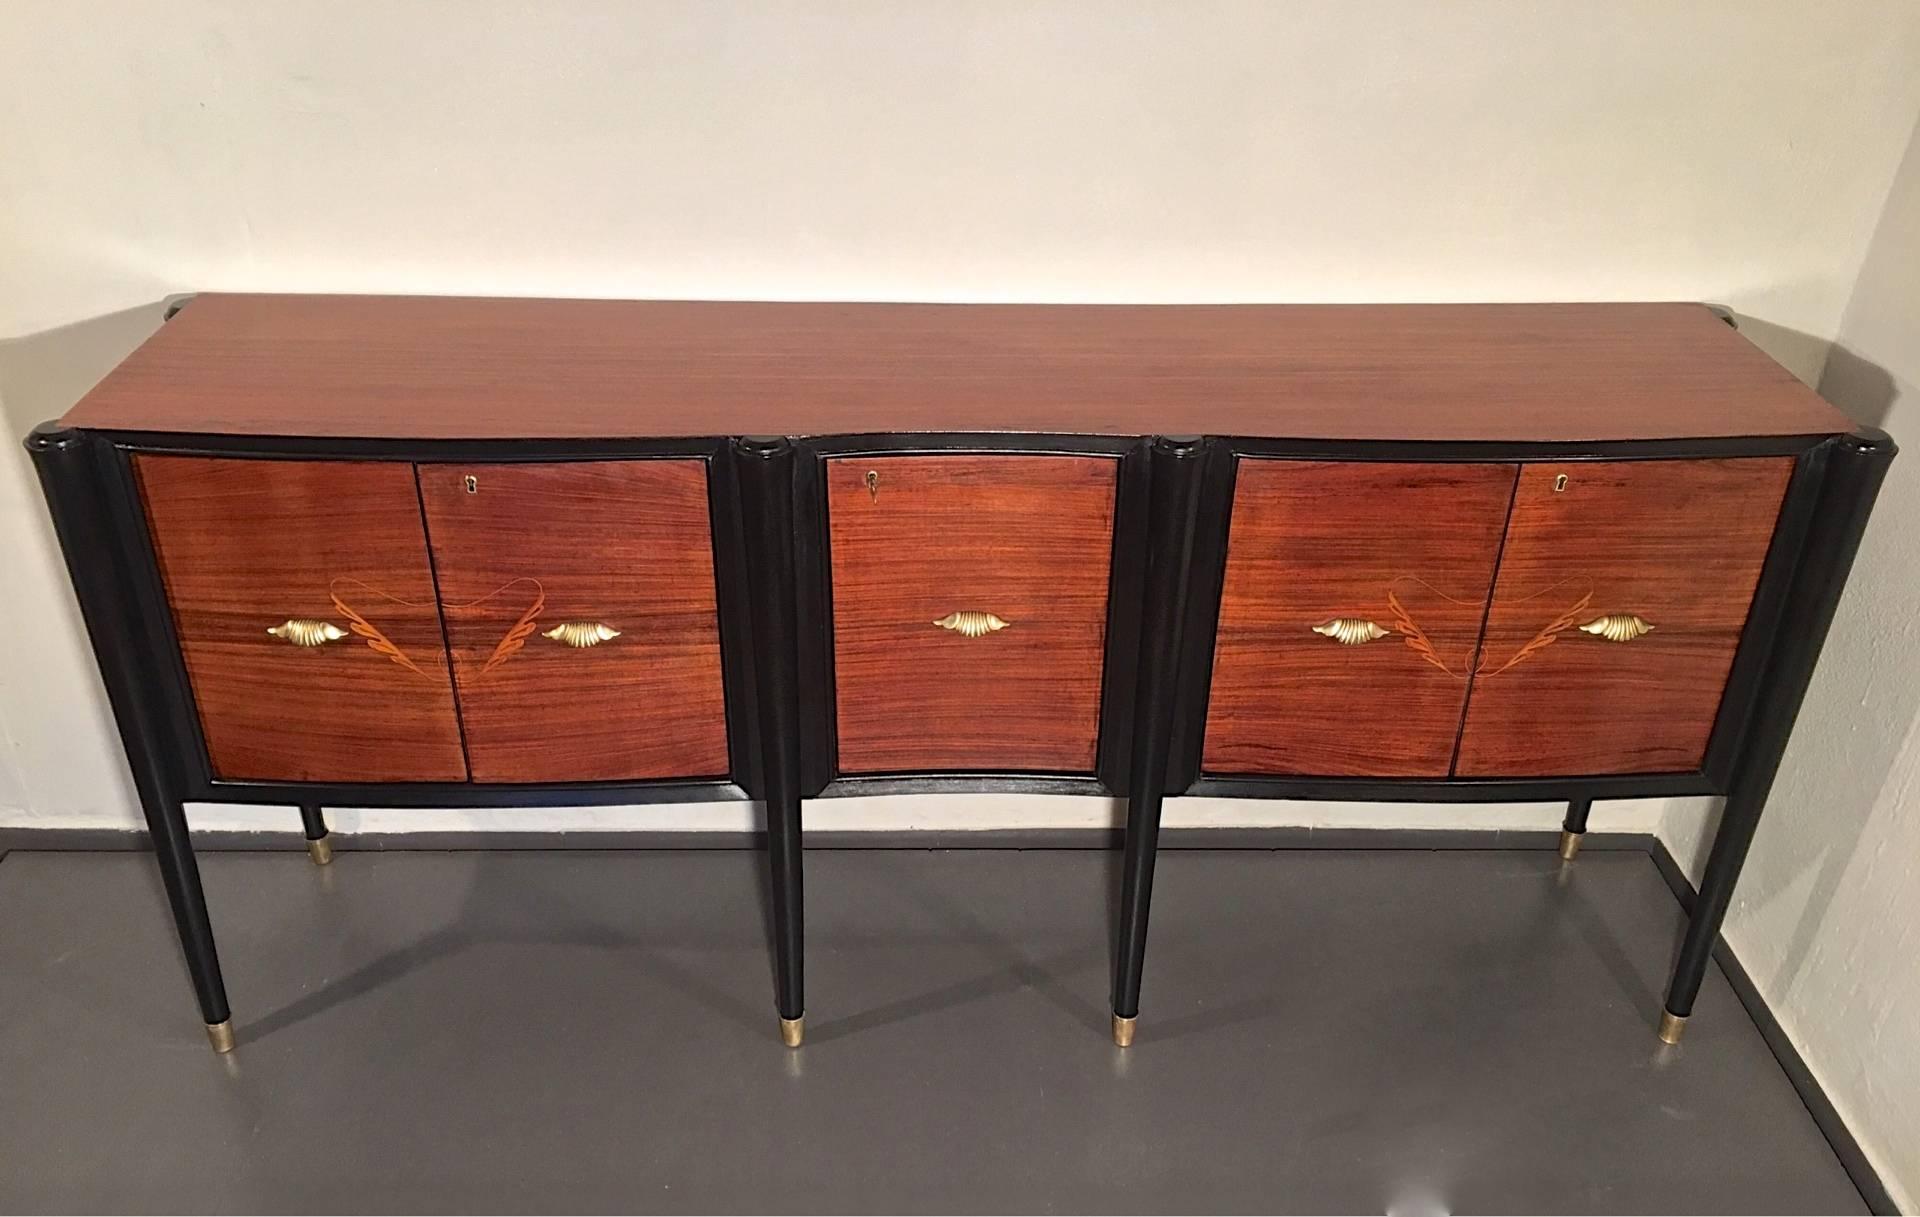 An Italian credenza or sideboard with double doors on the side and a single door in the middle. Sculptural details such as the curved lining on the front and the tapered ebonized legs with brass feet. Decorative doorhandles and beautifully detailed